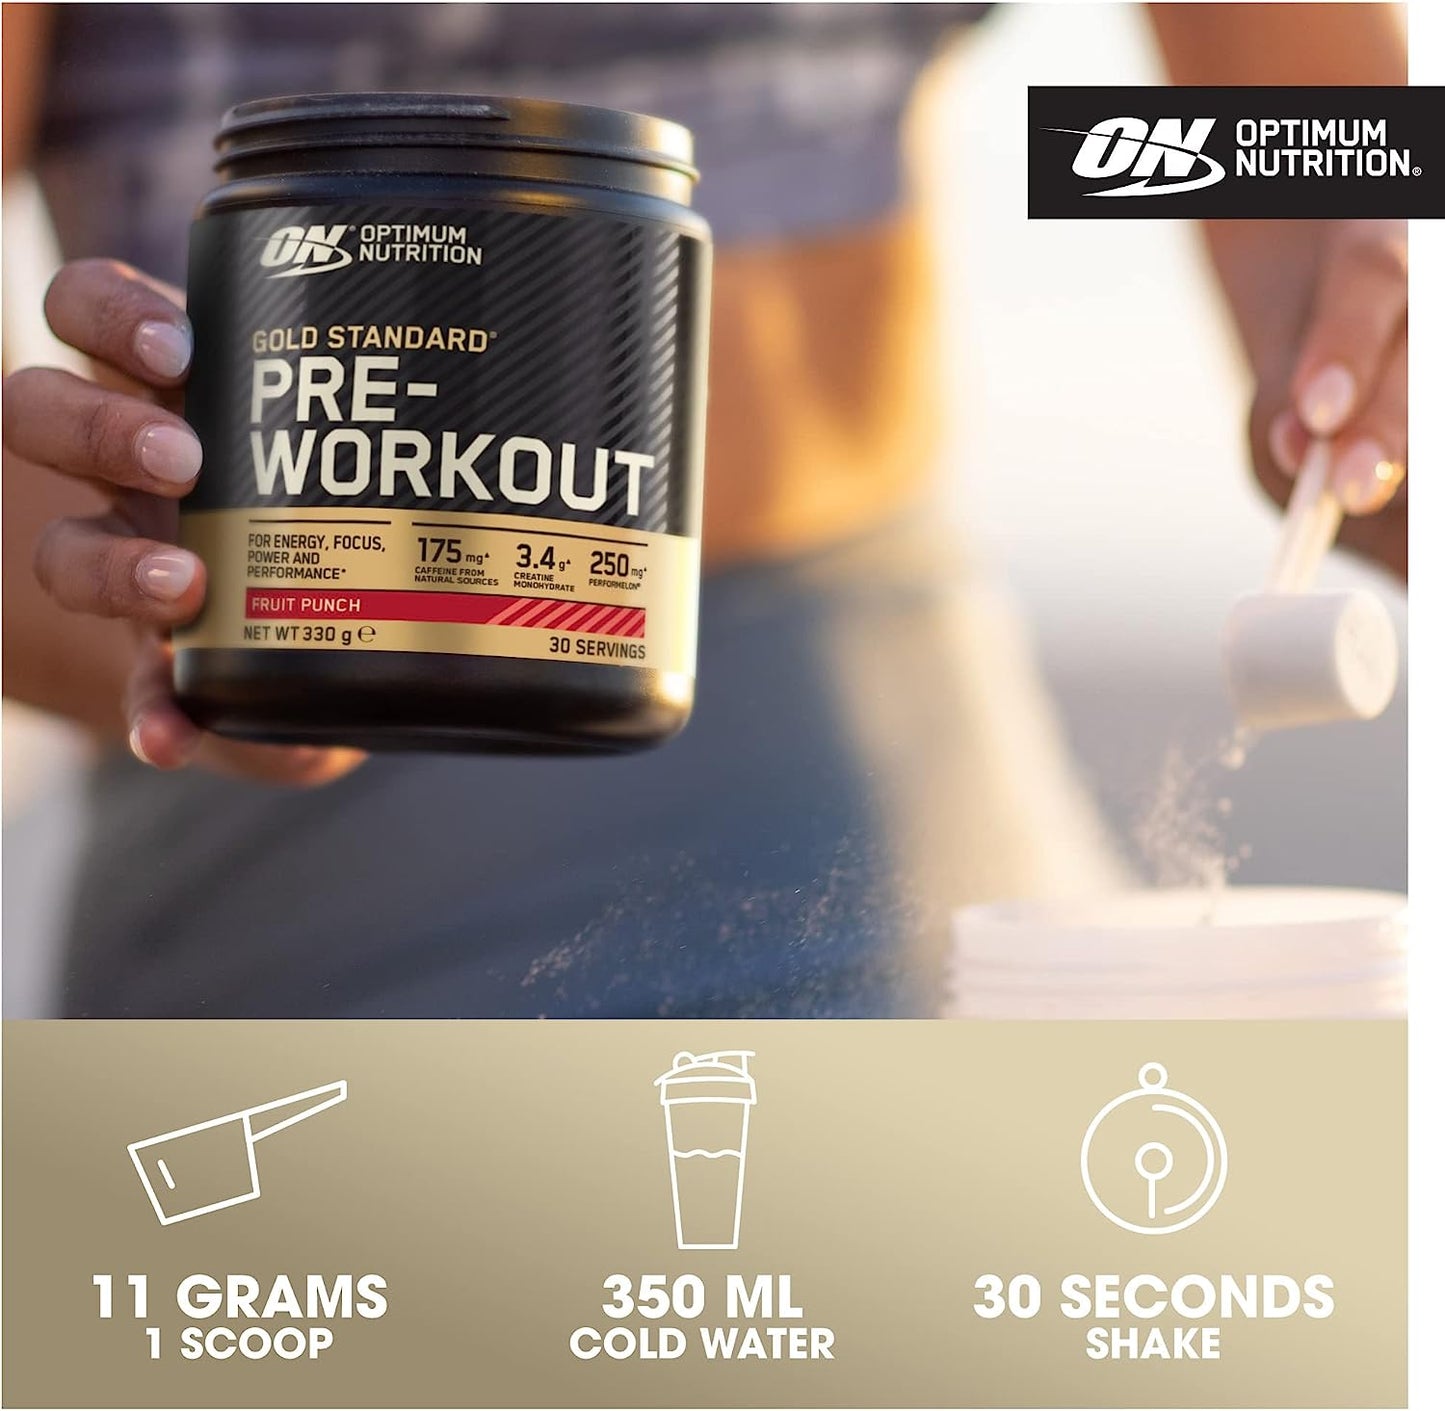 Gold Standard Pre Workout Powder, Energy Drink with Creatine Monohydrate, Beta Alanine, Caffeine and Vitamin B Complex, Fruit Punch, 30 Servings, 330G, Packaging May Vary